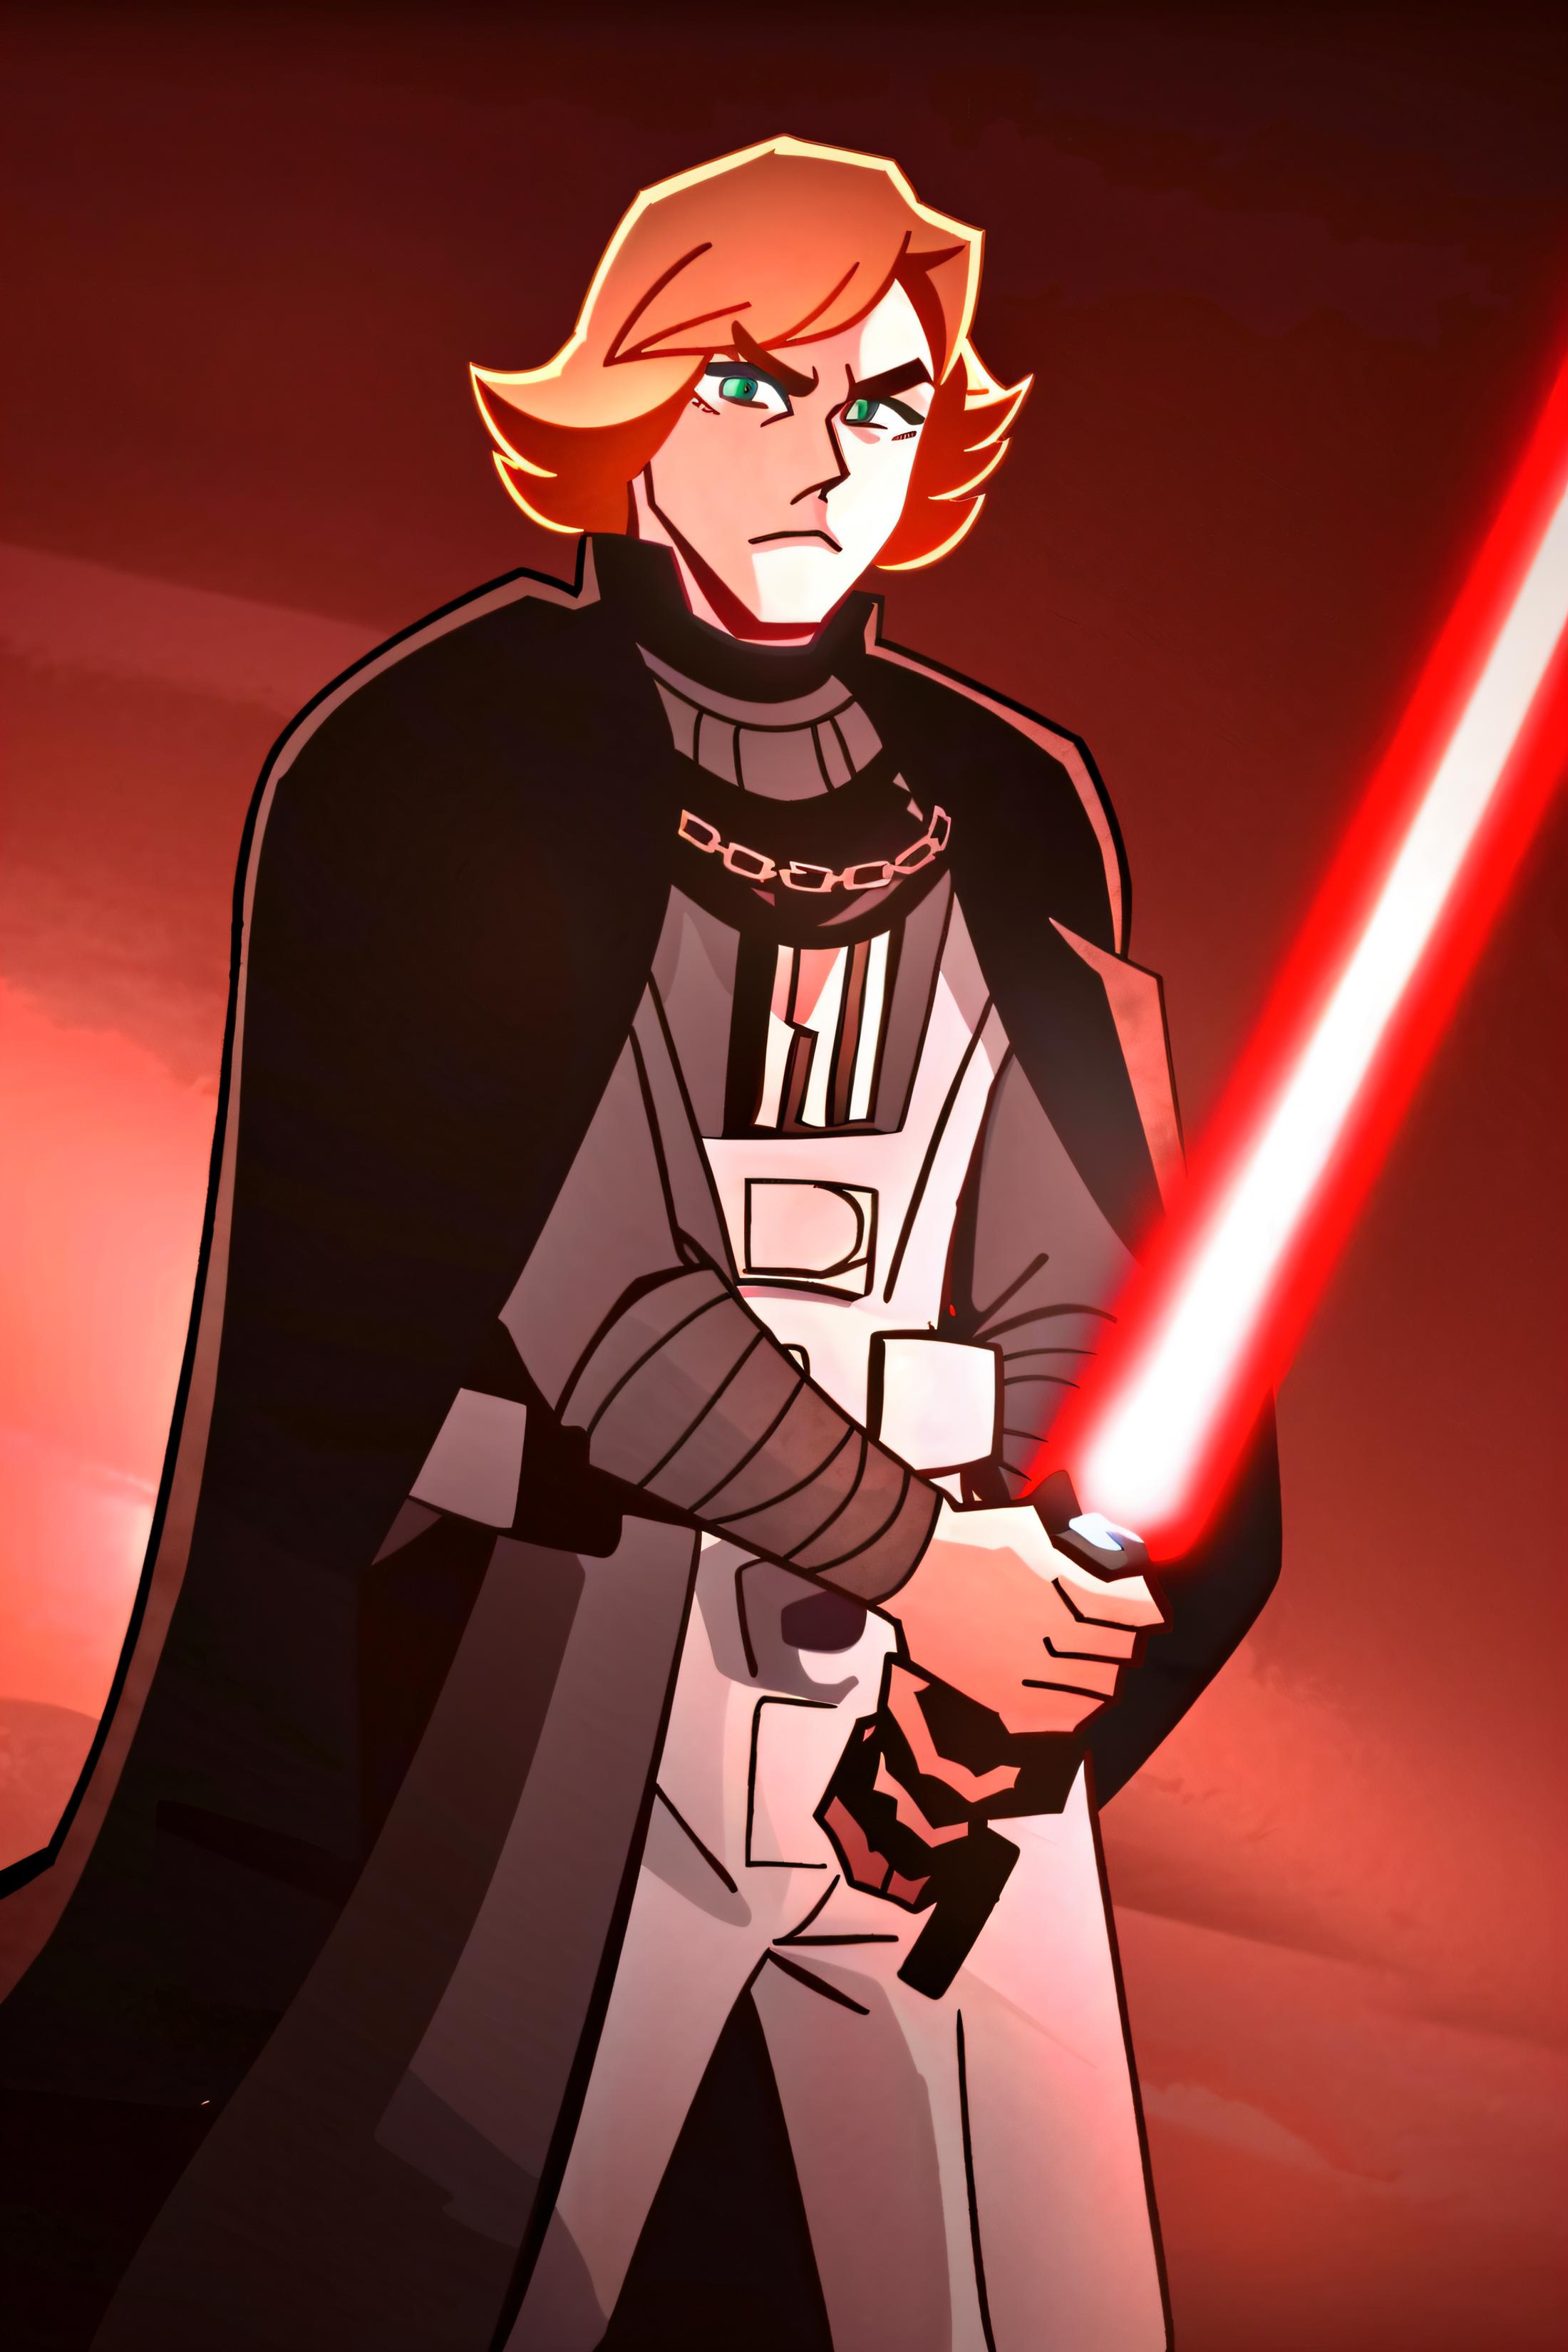 Star Wars Galaxy of Adventures (Style) image by twoundead